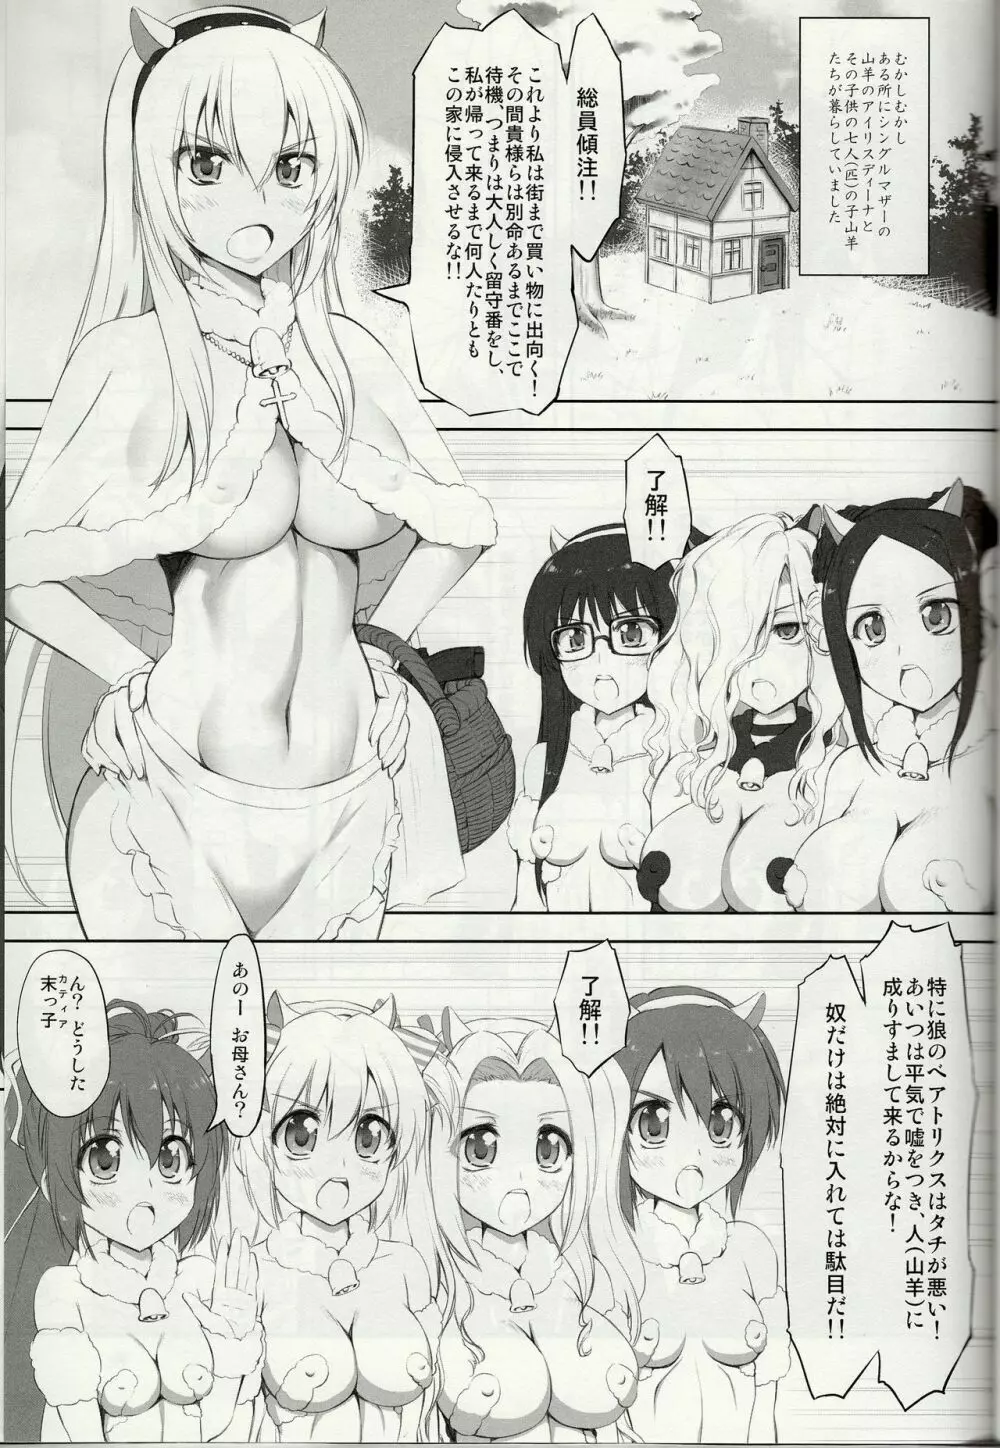 7Girls and wolf Page.3